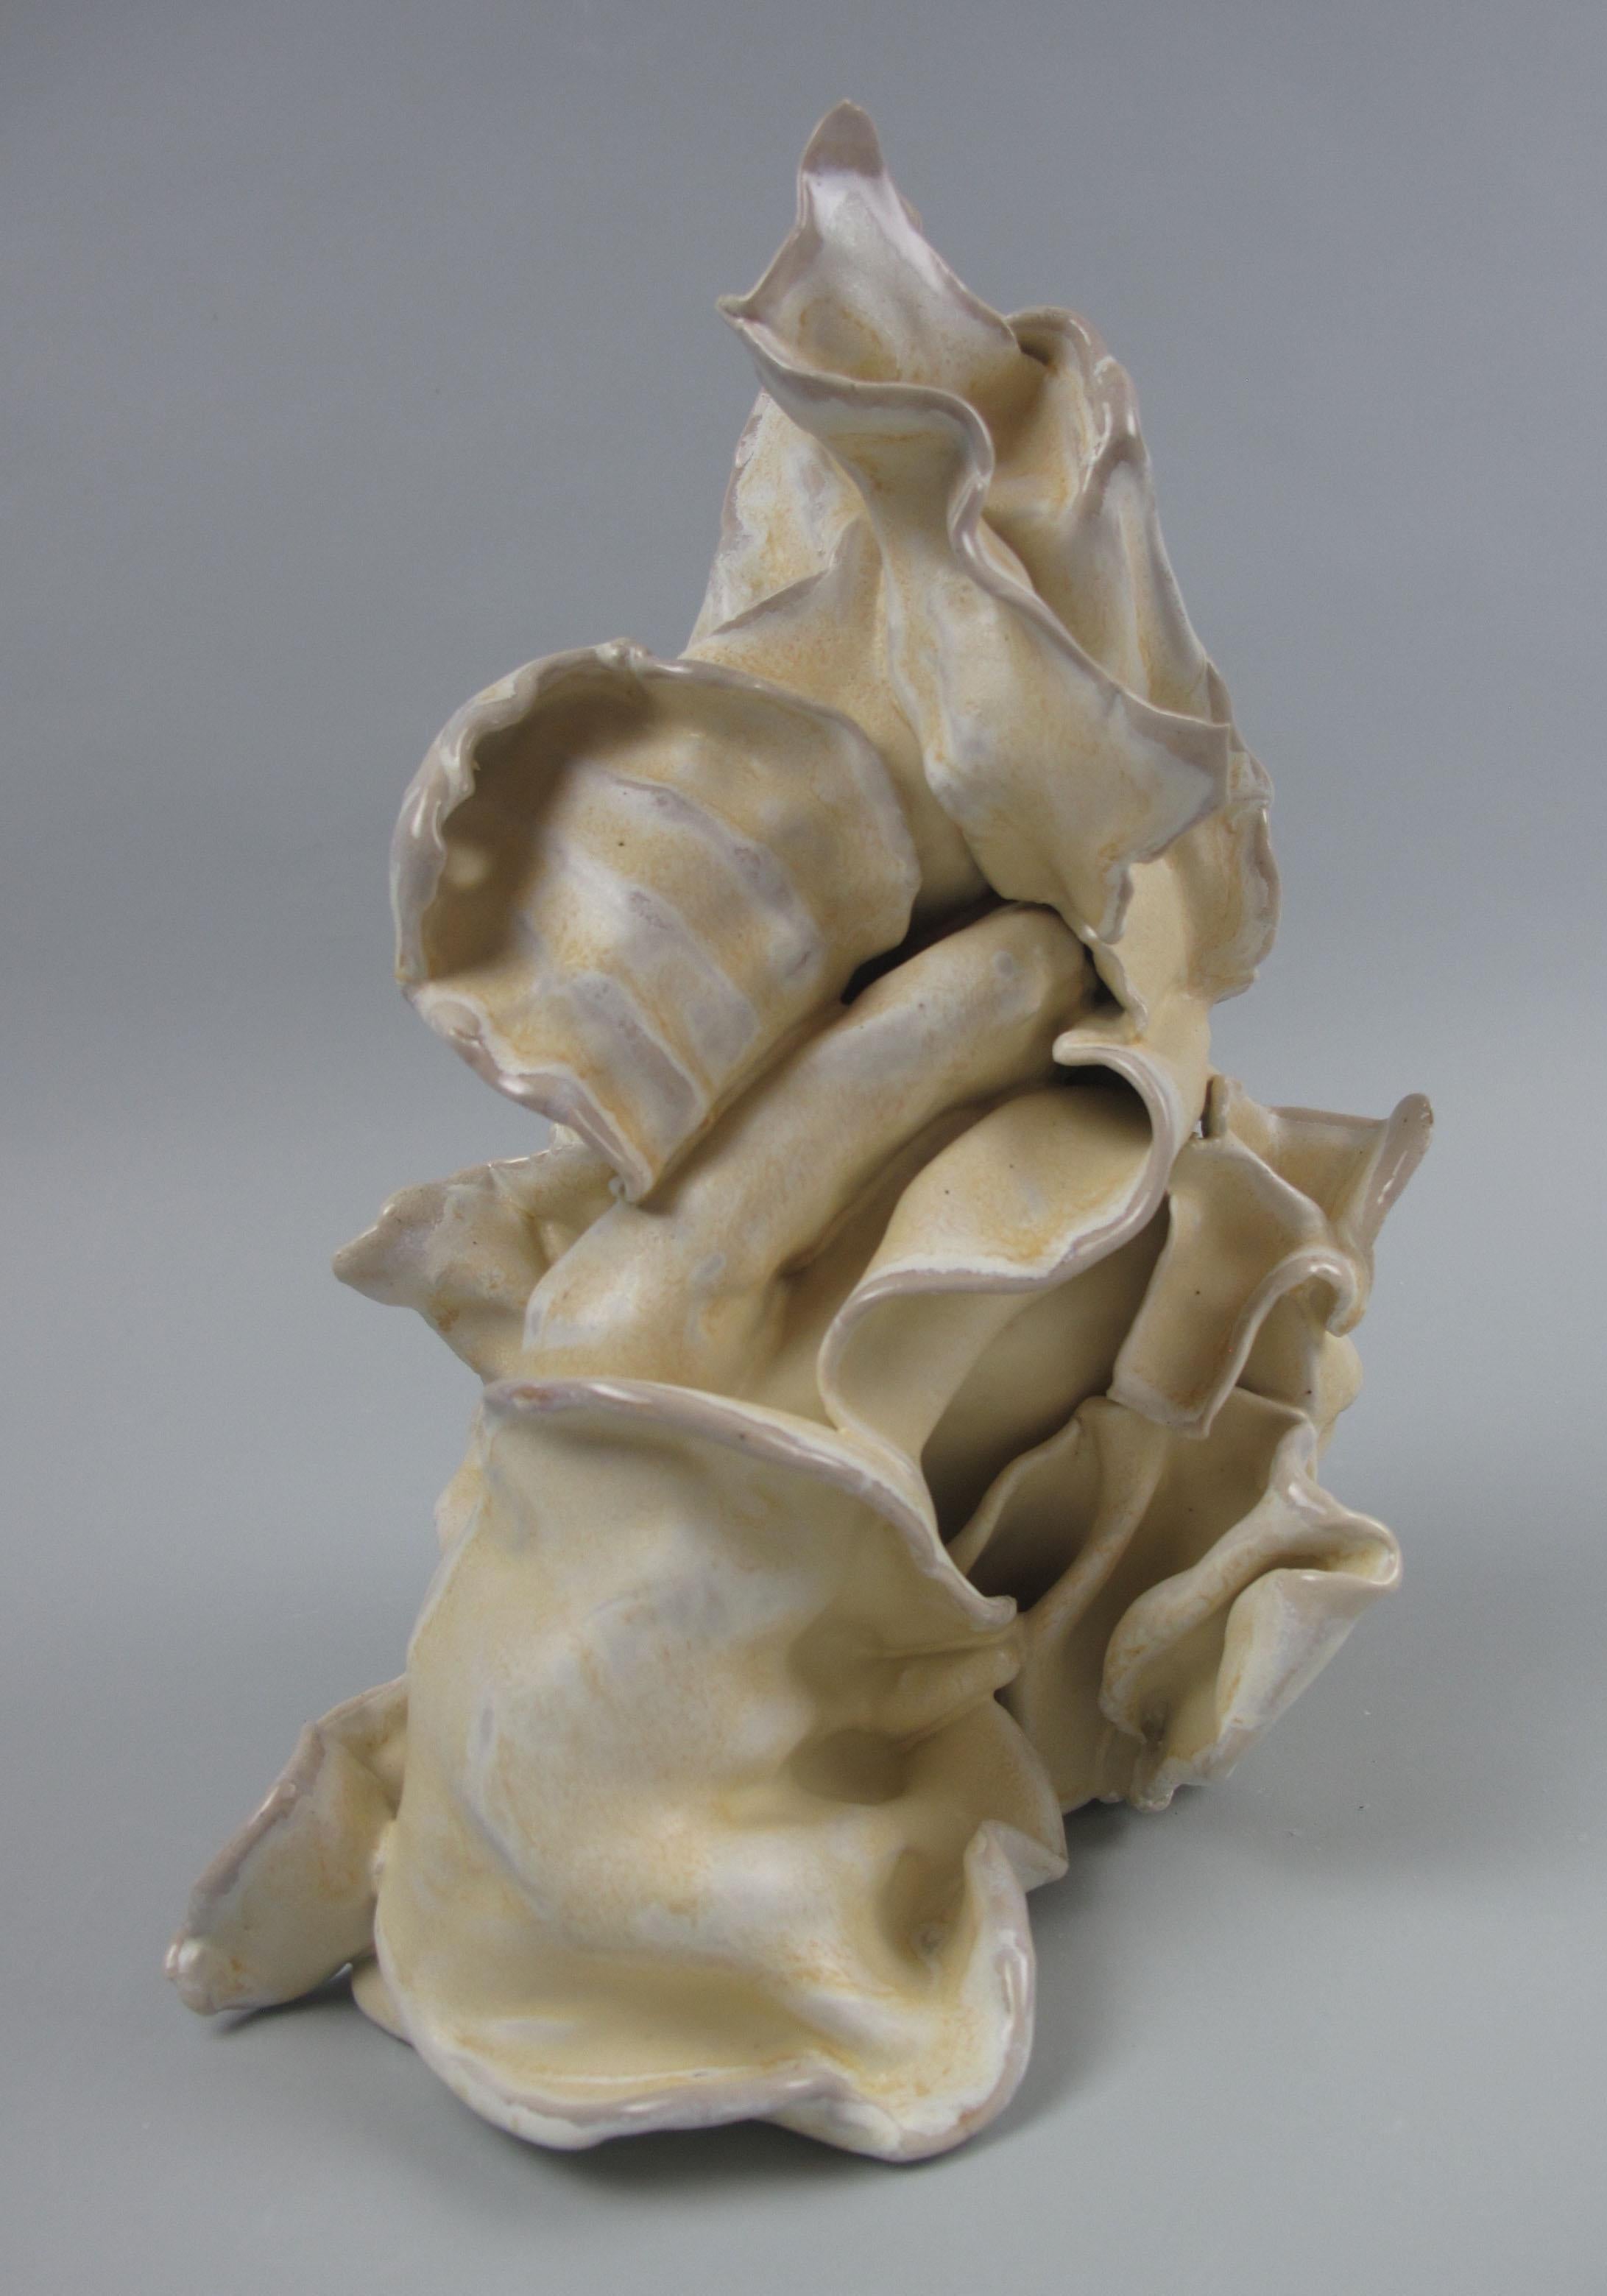 Sara Fine-Wilson's ”Grasp” is a gestural 10 x 8 x 5.5 inch ceramic sculpture in pale yellow with accents of cream, white and tan. In this graceful and evocative sculpture individual slab elements are assembled, layered in glaze and soda fired. This